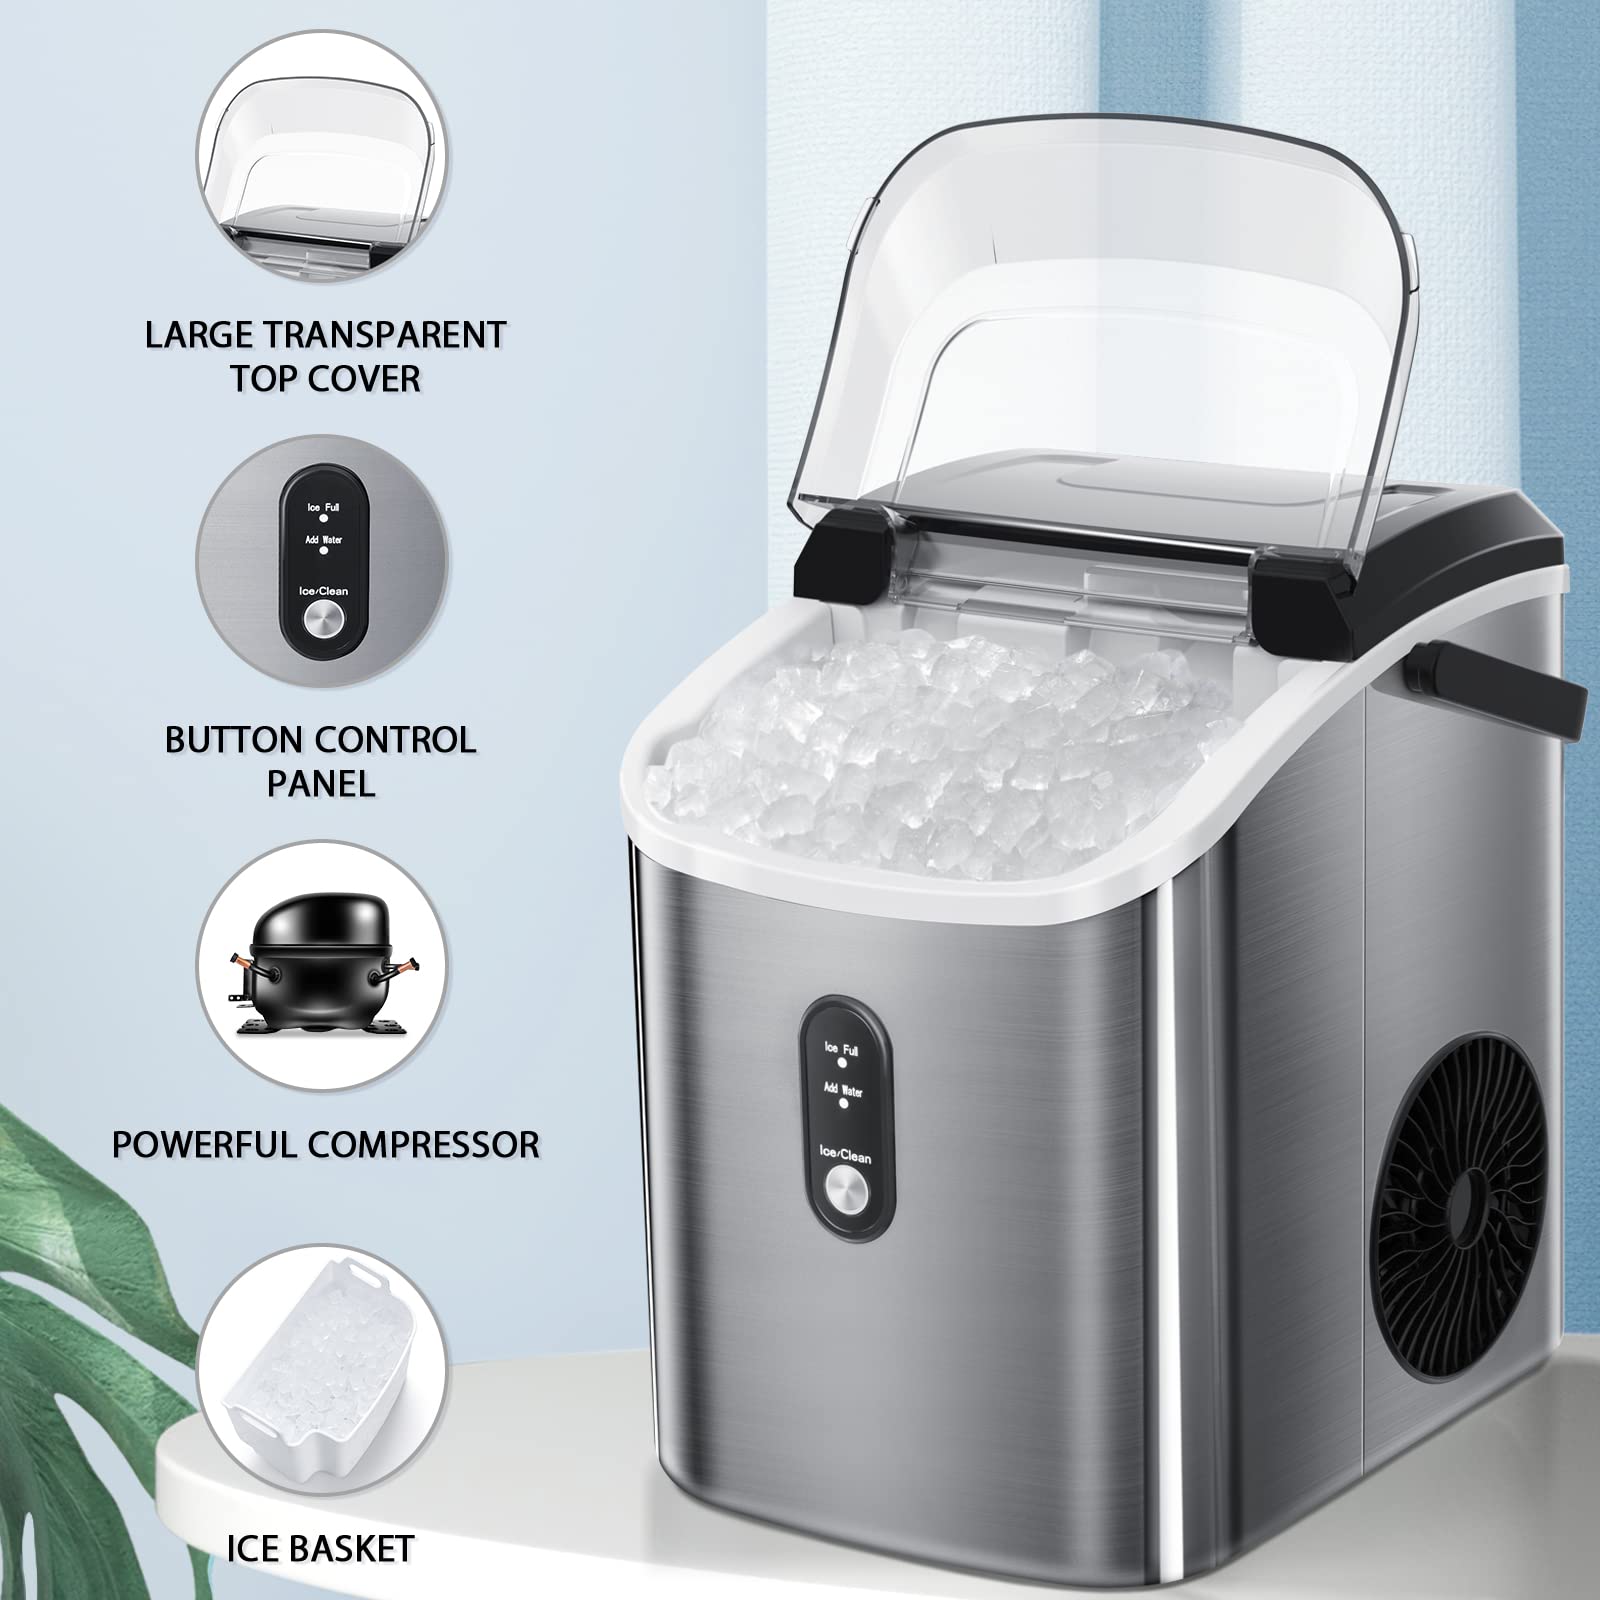 Portable Ice Makers for sale in Greenville, South Carolina